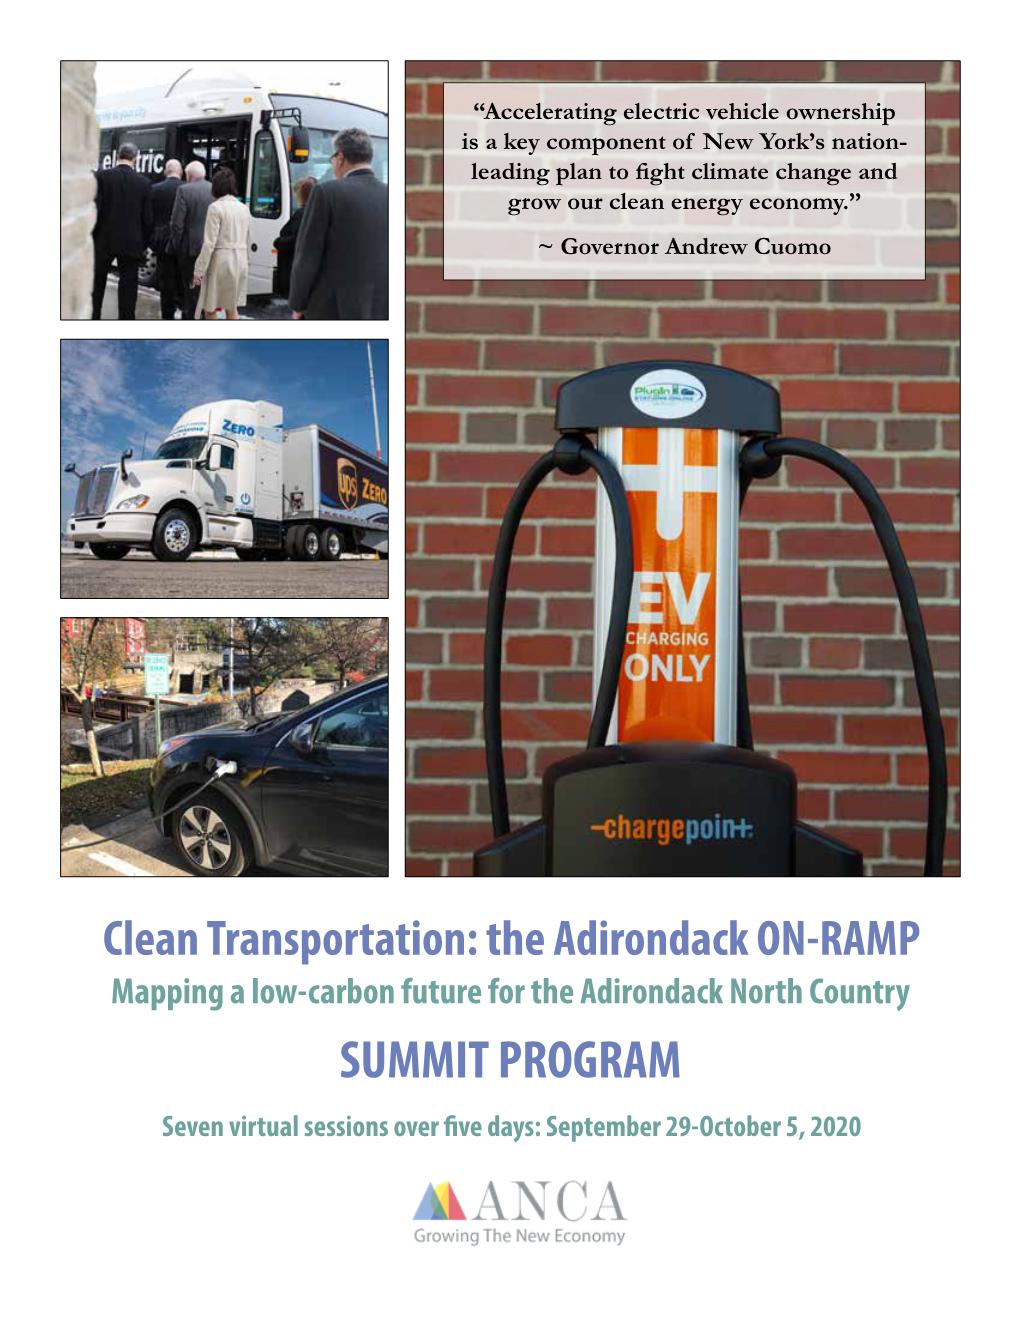 Clean Transportation: the Adirondack ON-RAMP Mapping a Low-Carbon Future for the Adirondack North Country SUMMIT PROGRAM